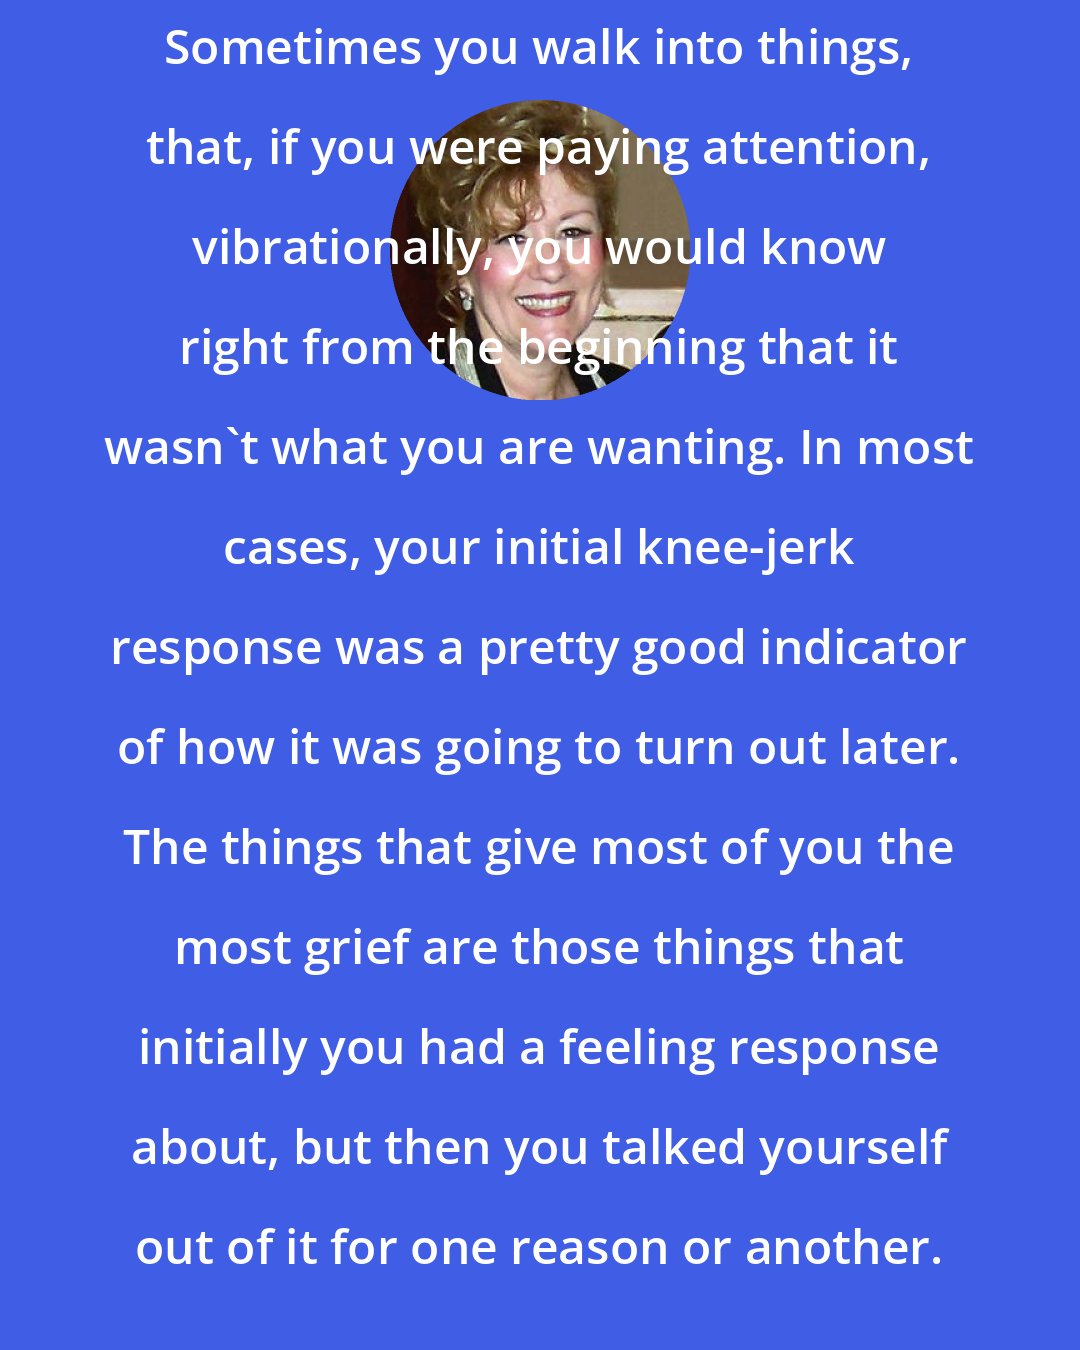 Esther Hicks: Sometimes you walk into things, that, if you were paying attention, vibrationally, you would know right from the beginning that it wasn't what you are wanting. In most cases, your initial knee-jerk response was a pretty good indicator of how it was going to turn out later. The things that give most of you the most grief are those things that initially you had a feeling response about, but then you talked yourself out of it for one reason or another.